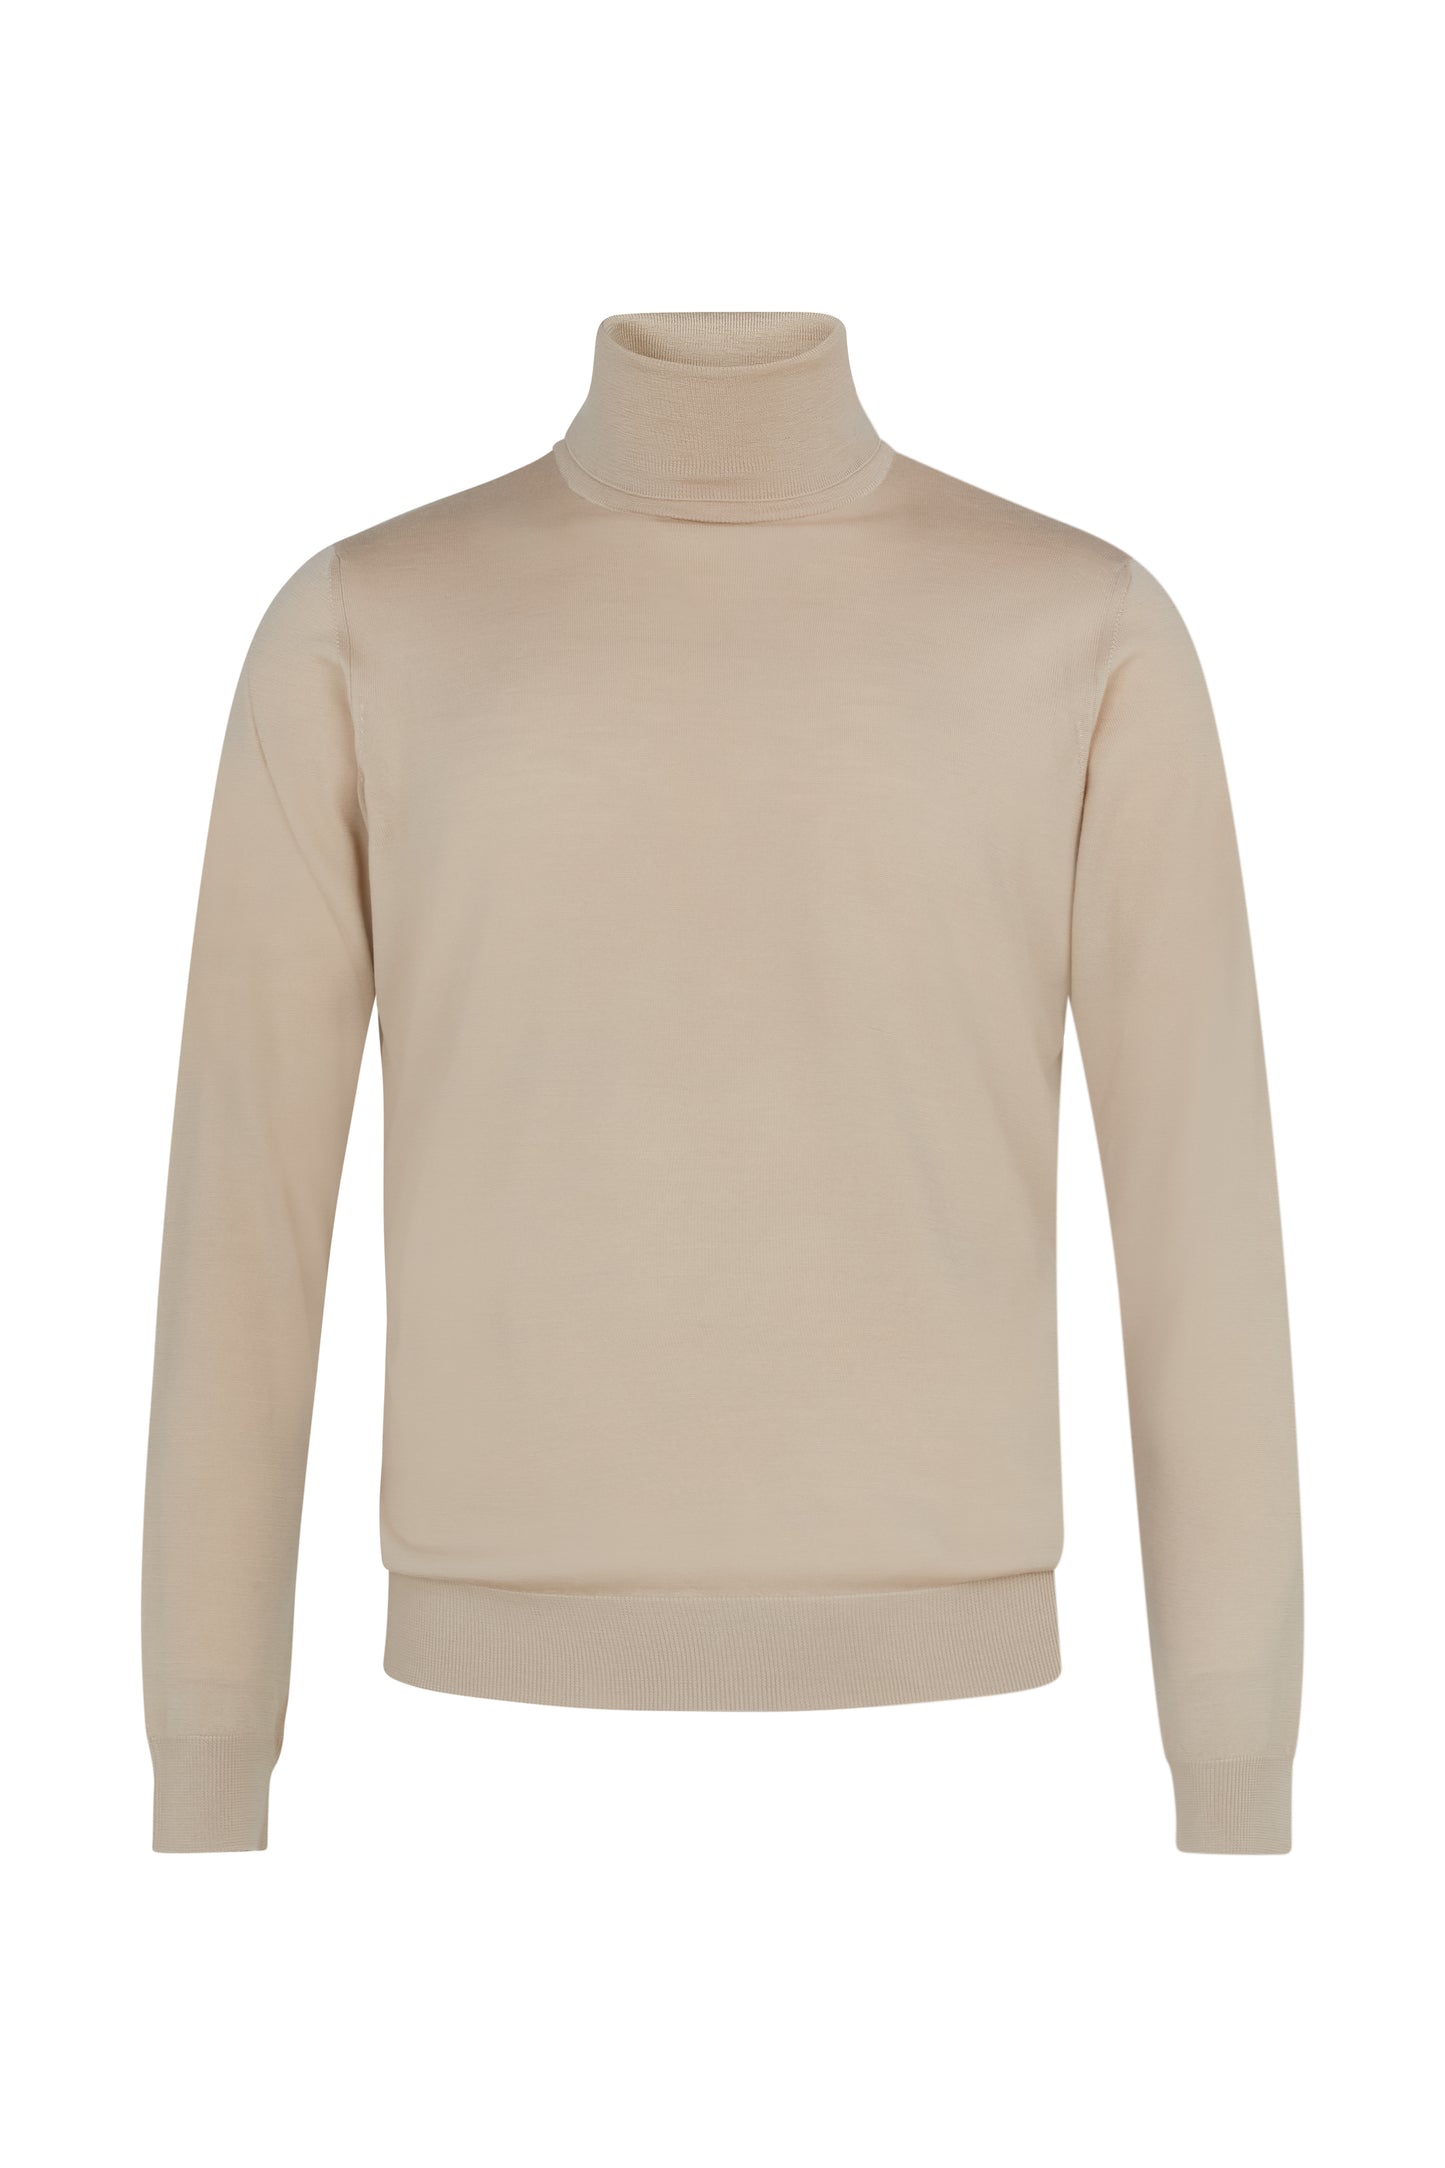 Lightweight 100% sustainable and traceable wool turtleneck